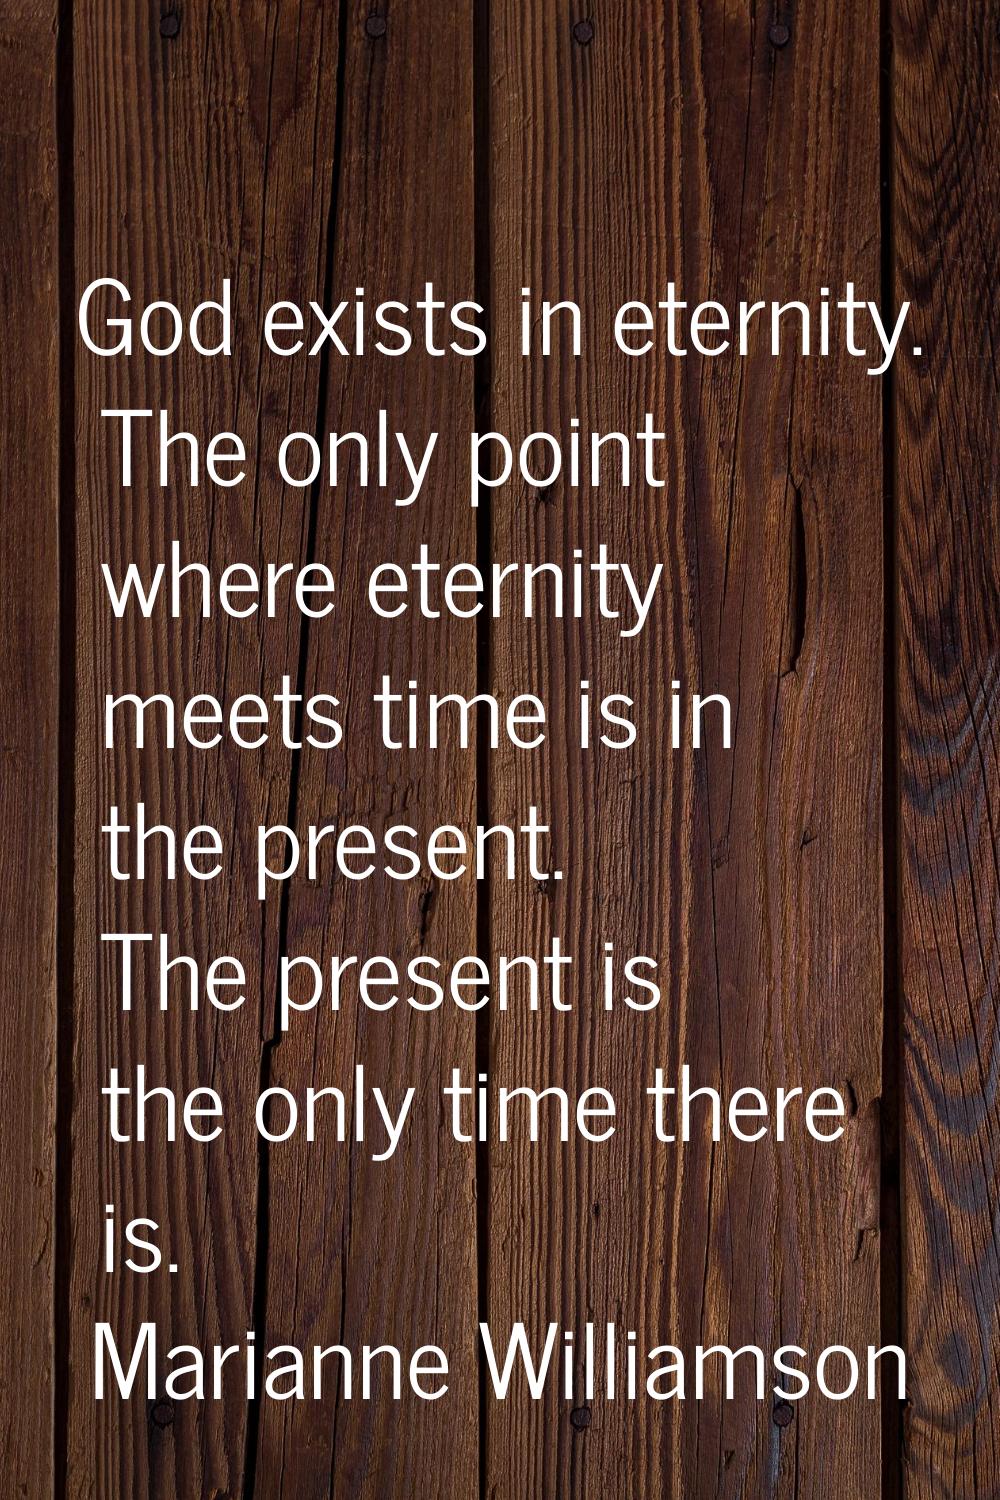 God exists in eternity. The only point where eternity meets time is in the present. The present is 